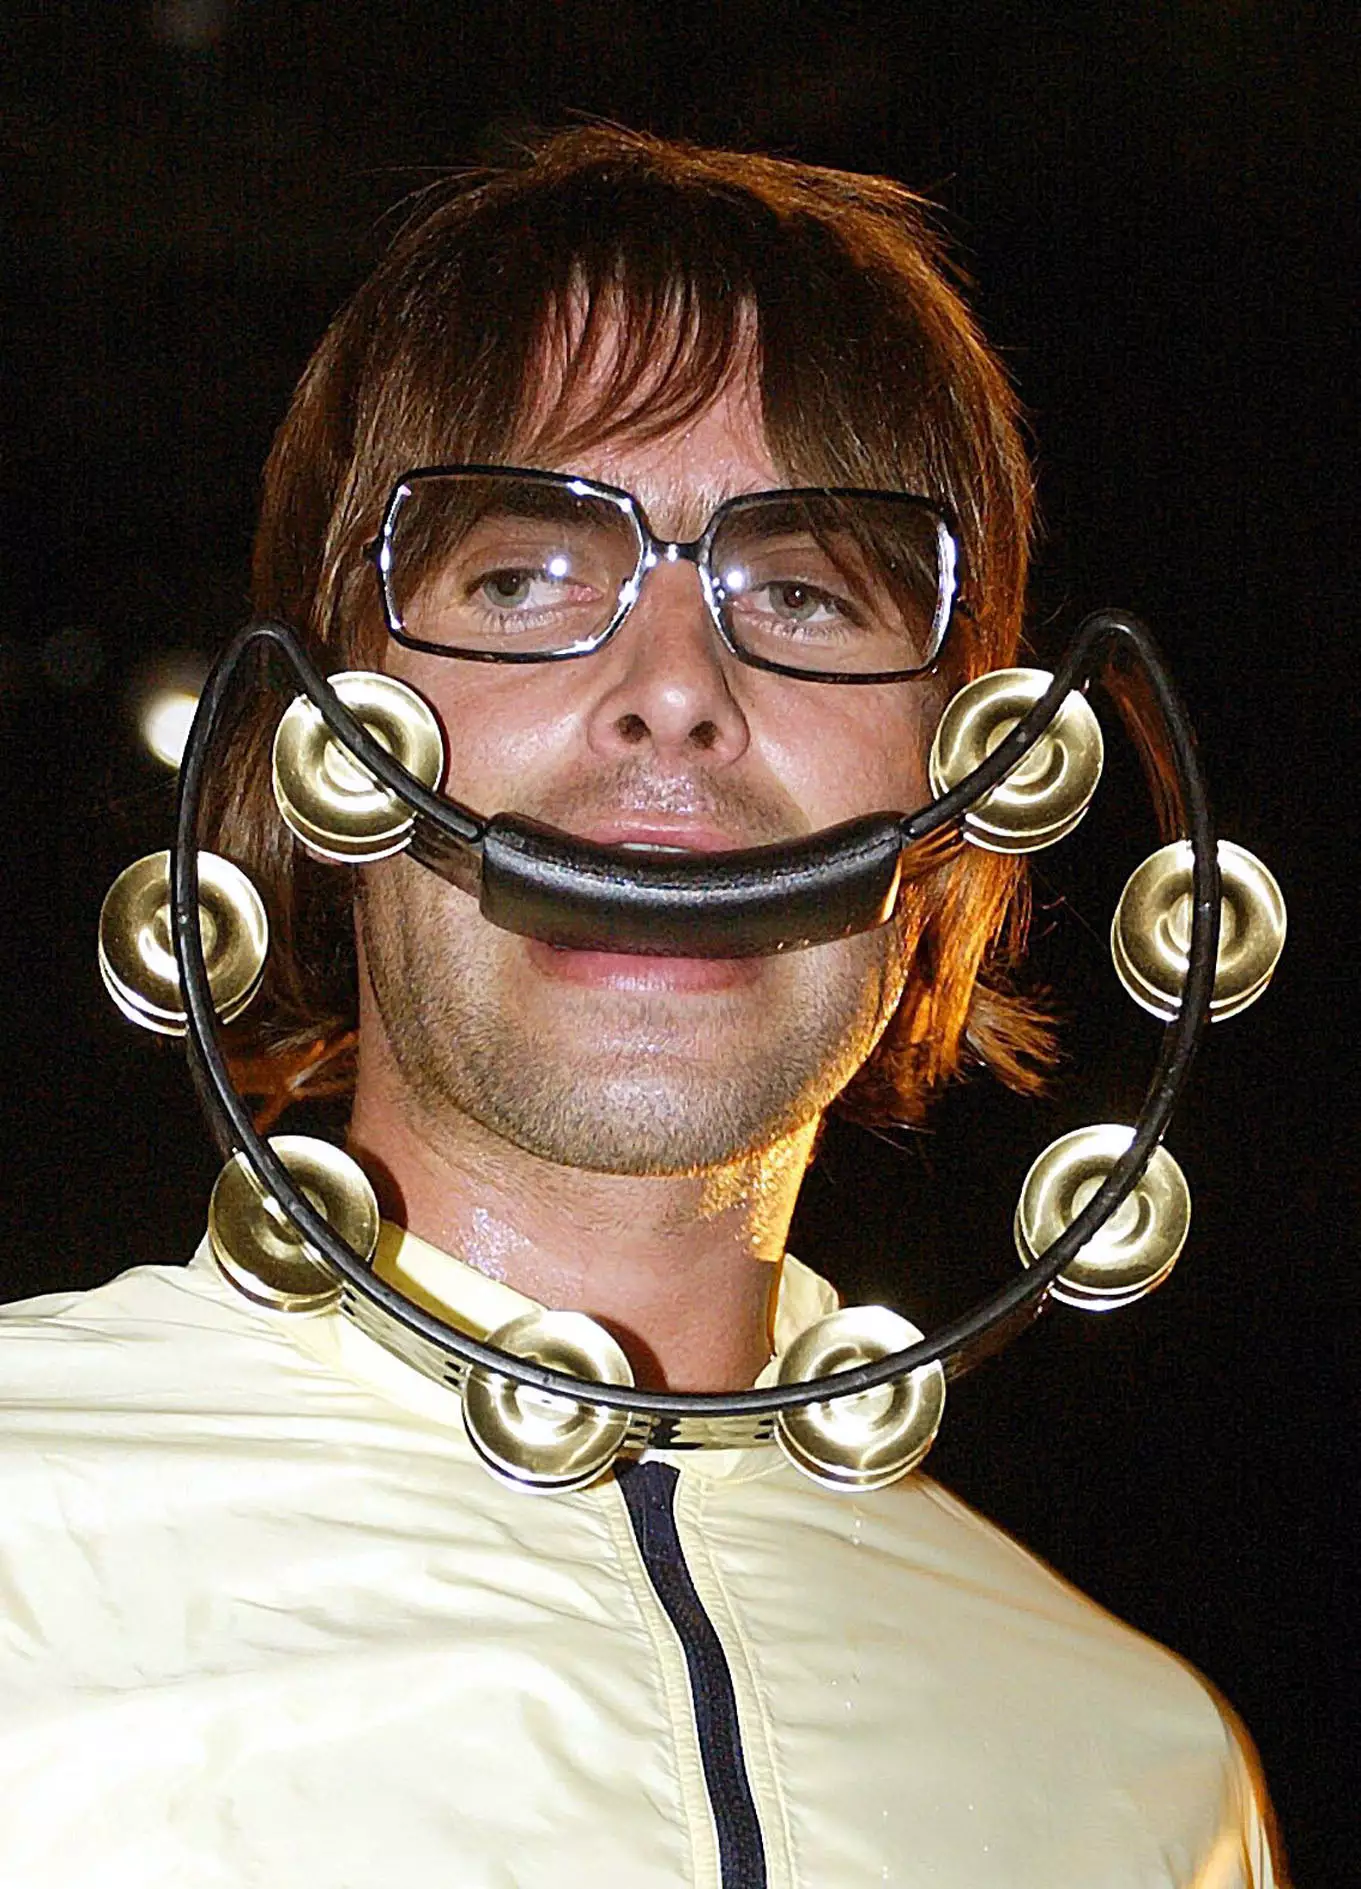 Liam Gallagher on stage in Germany in 2002.